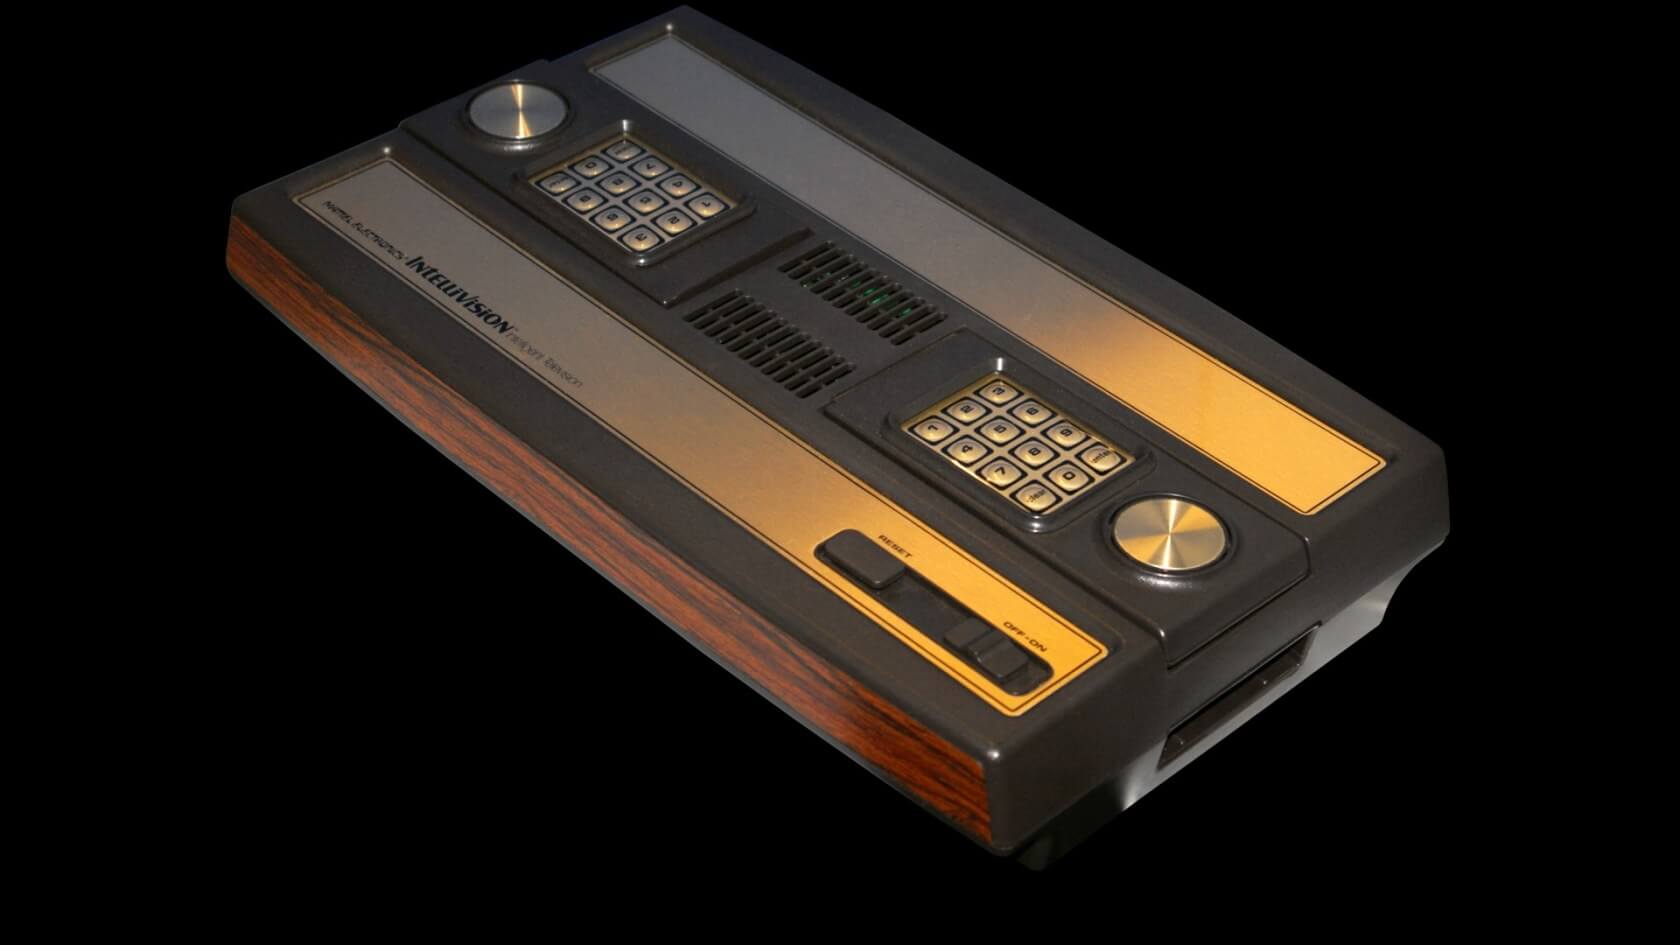 Video game music veteran Tommy Tallarico acquires Intellivision rights from Mattel